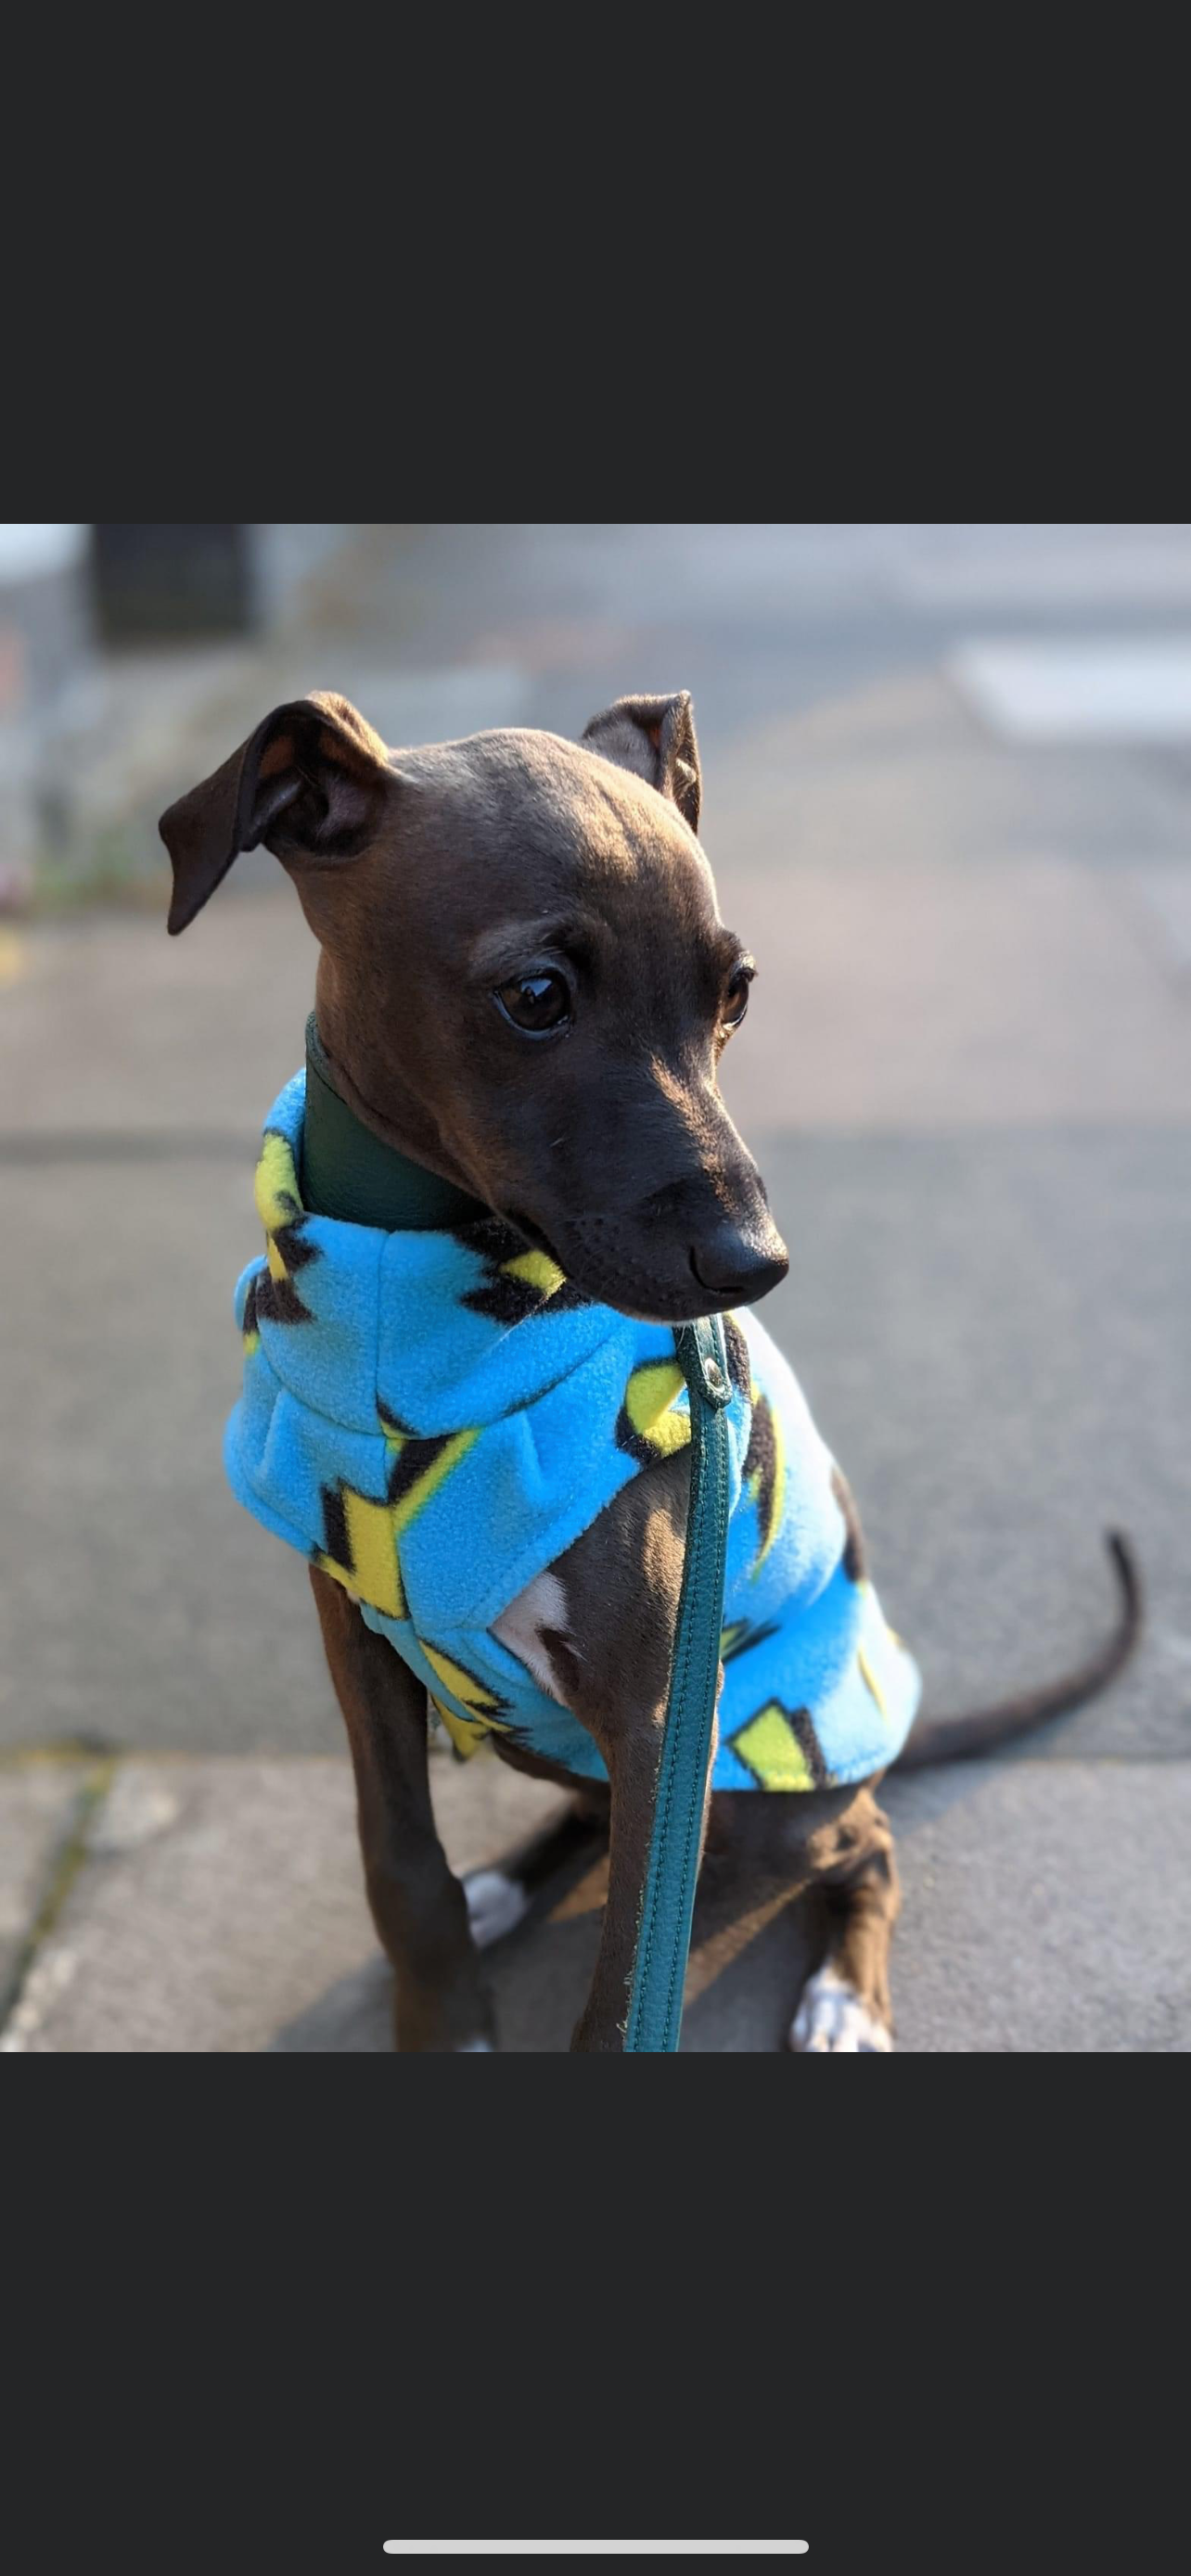 Made to order Italian Greyhound puppy vests - Patterned fleece